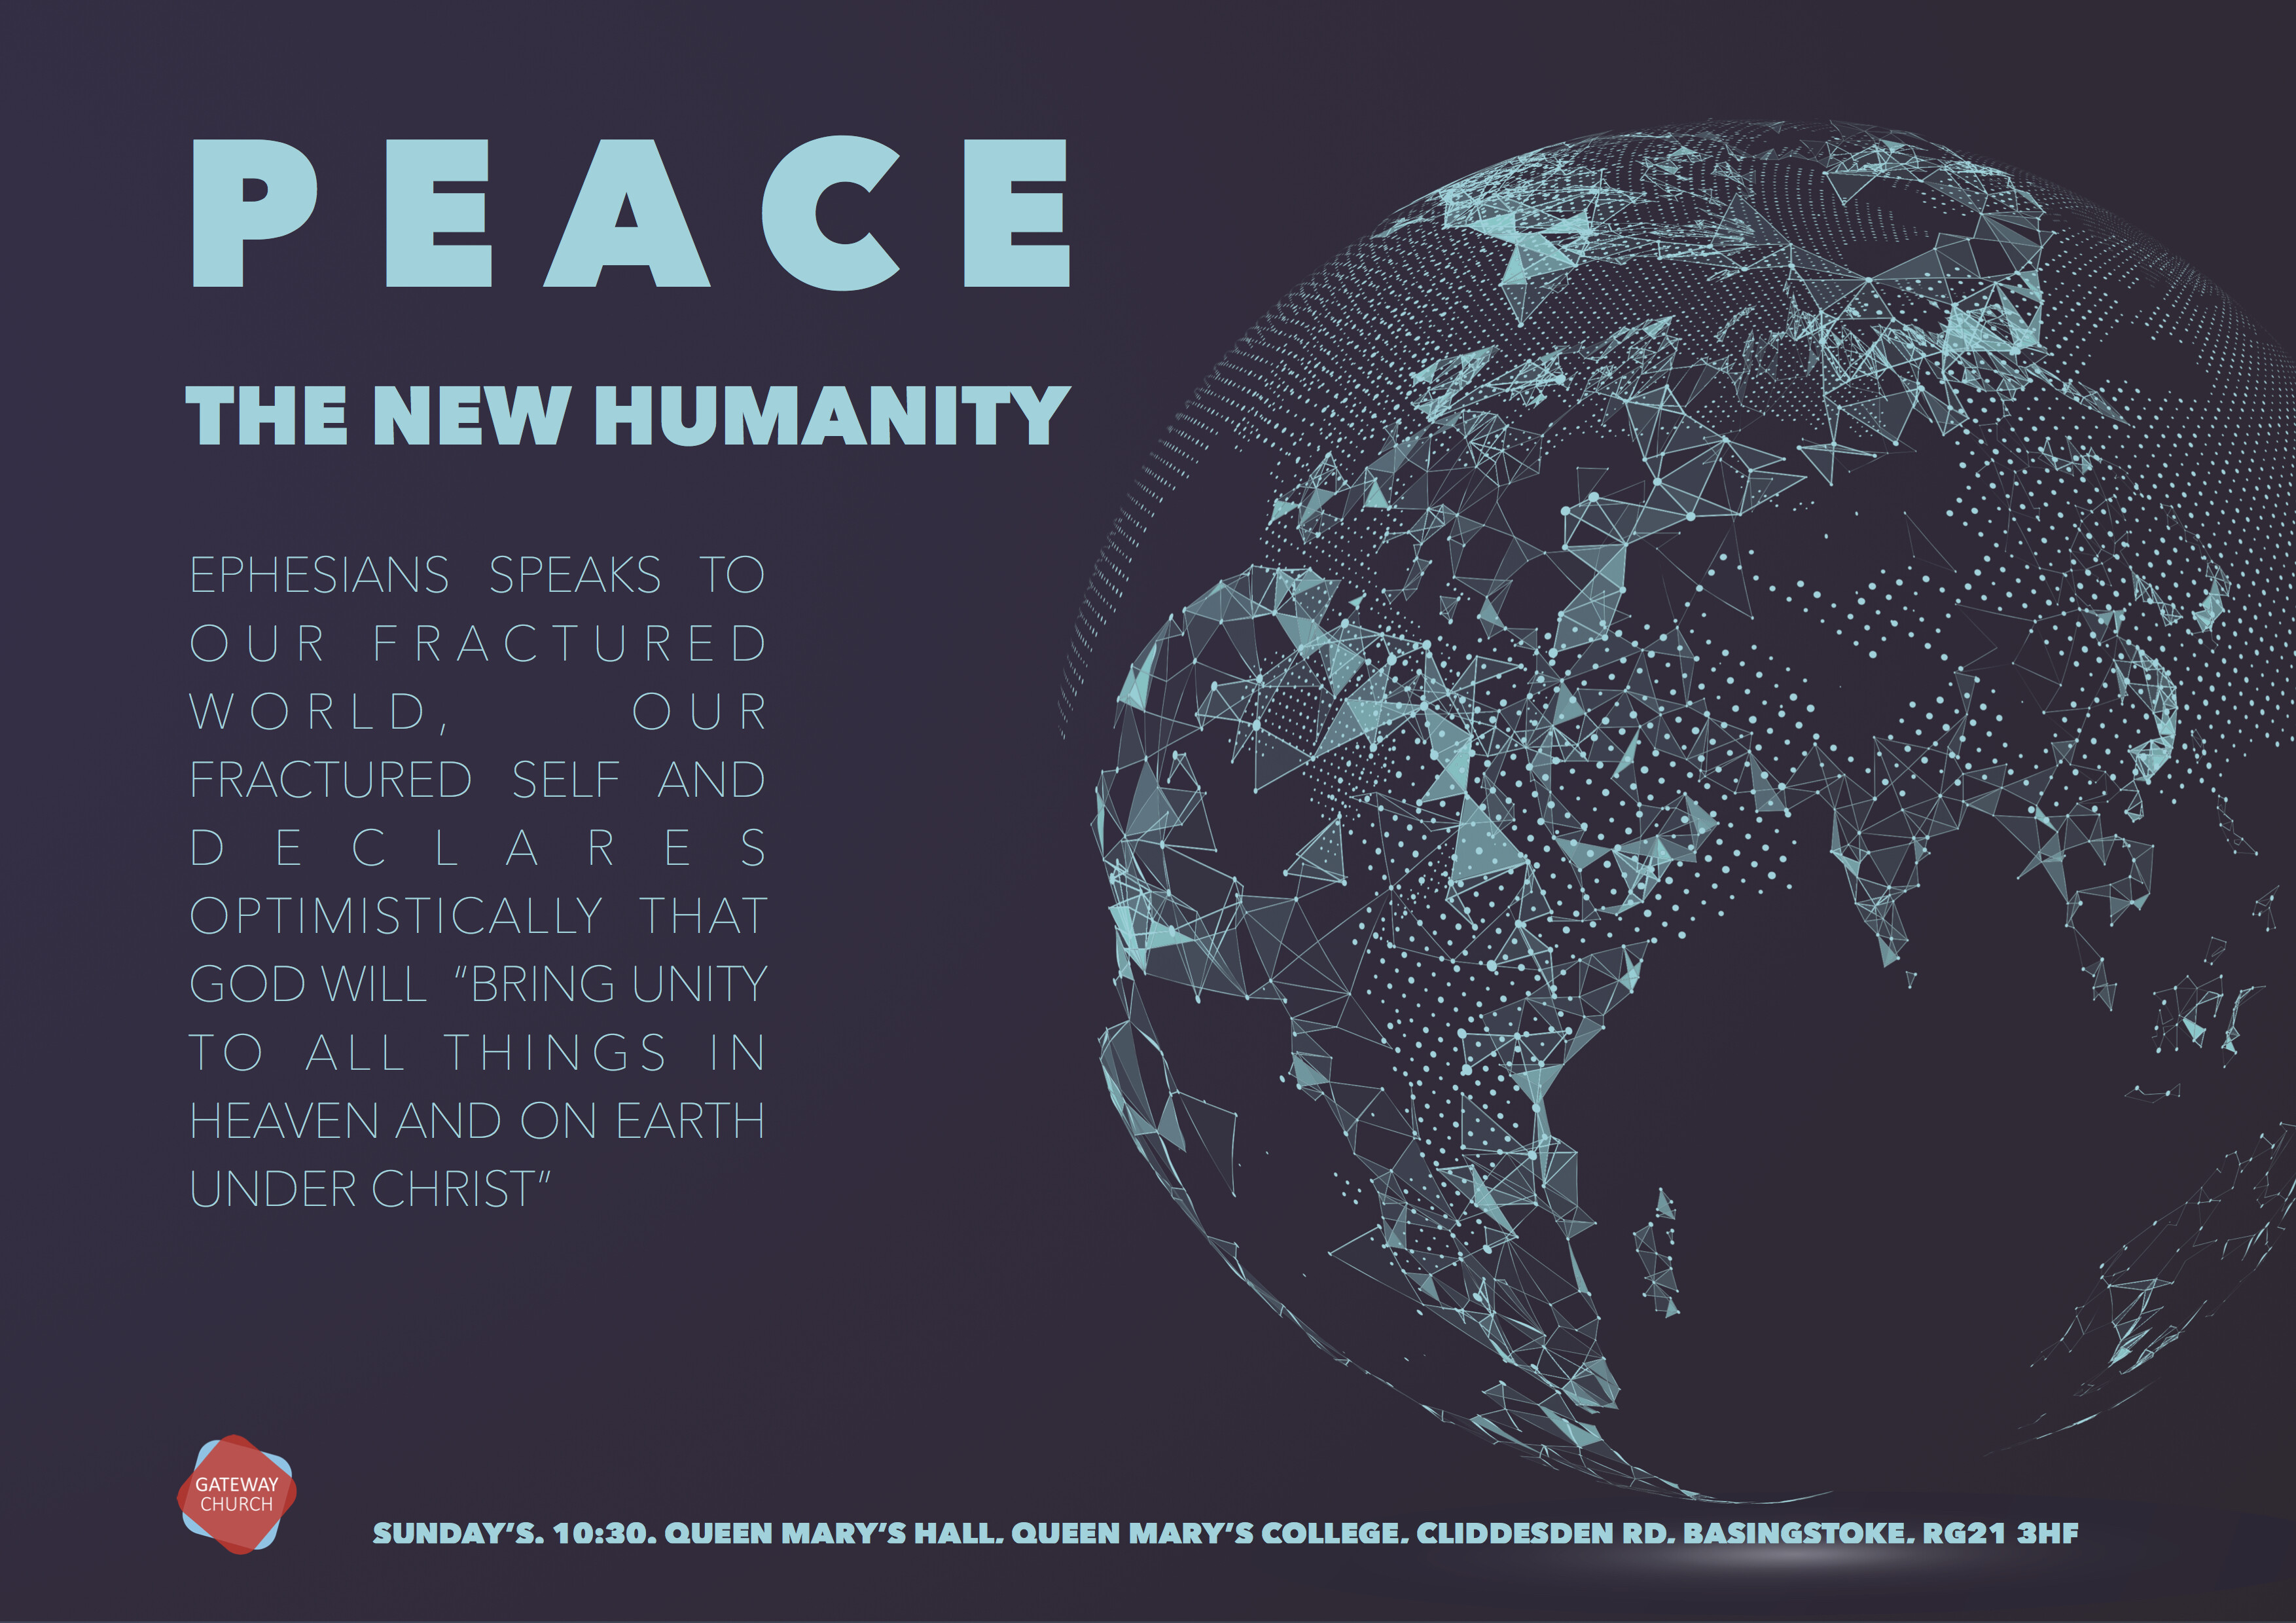 PEACE: The New Humanity